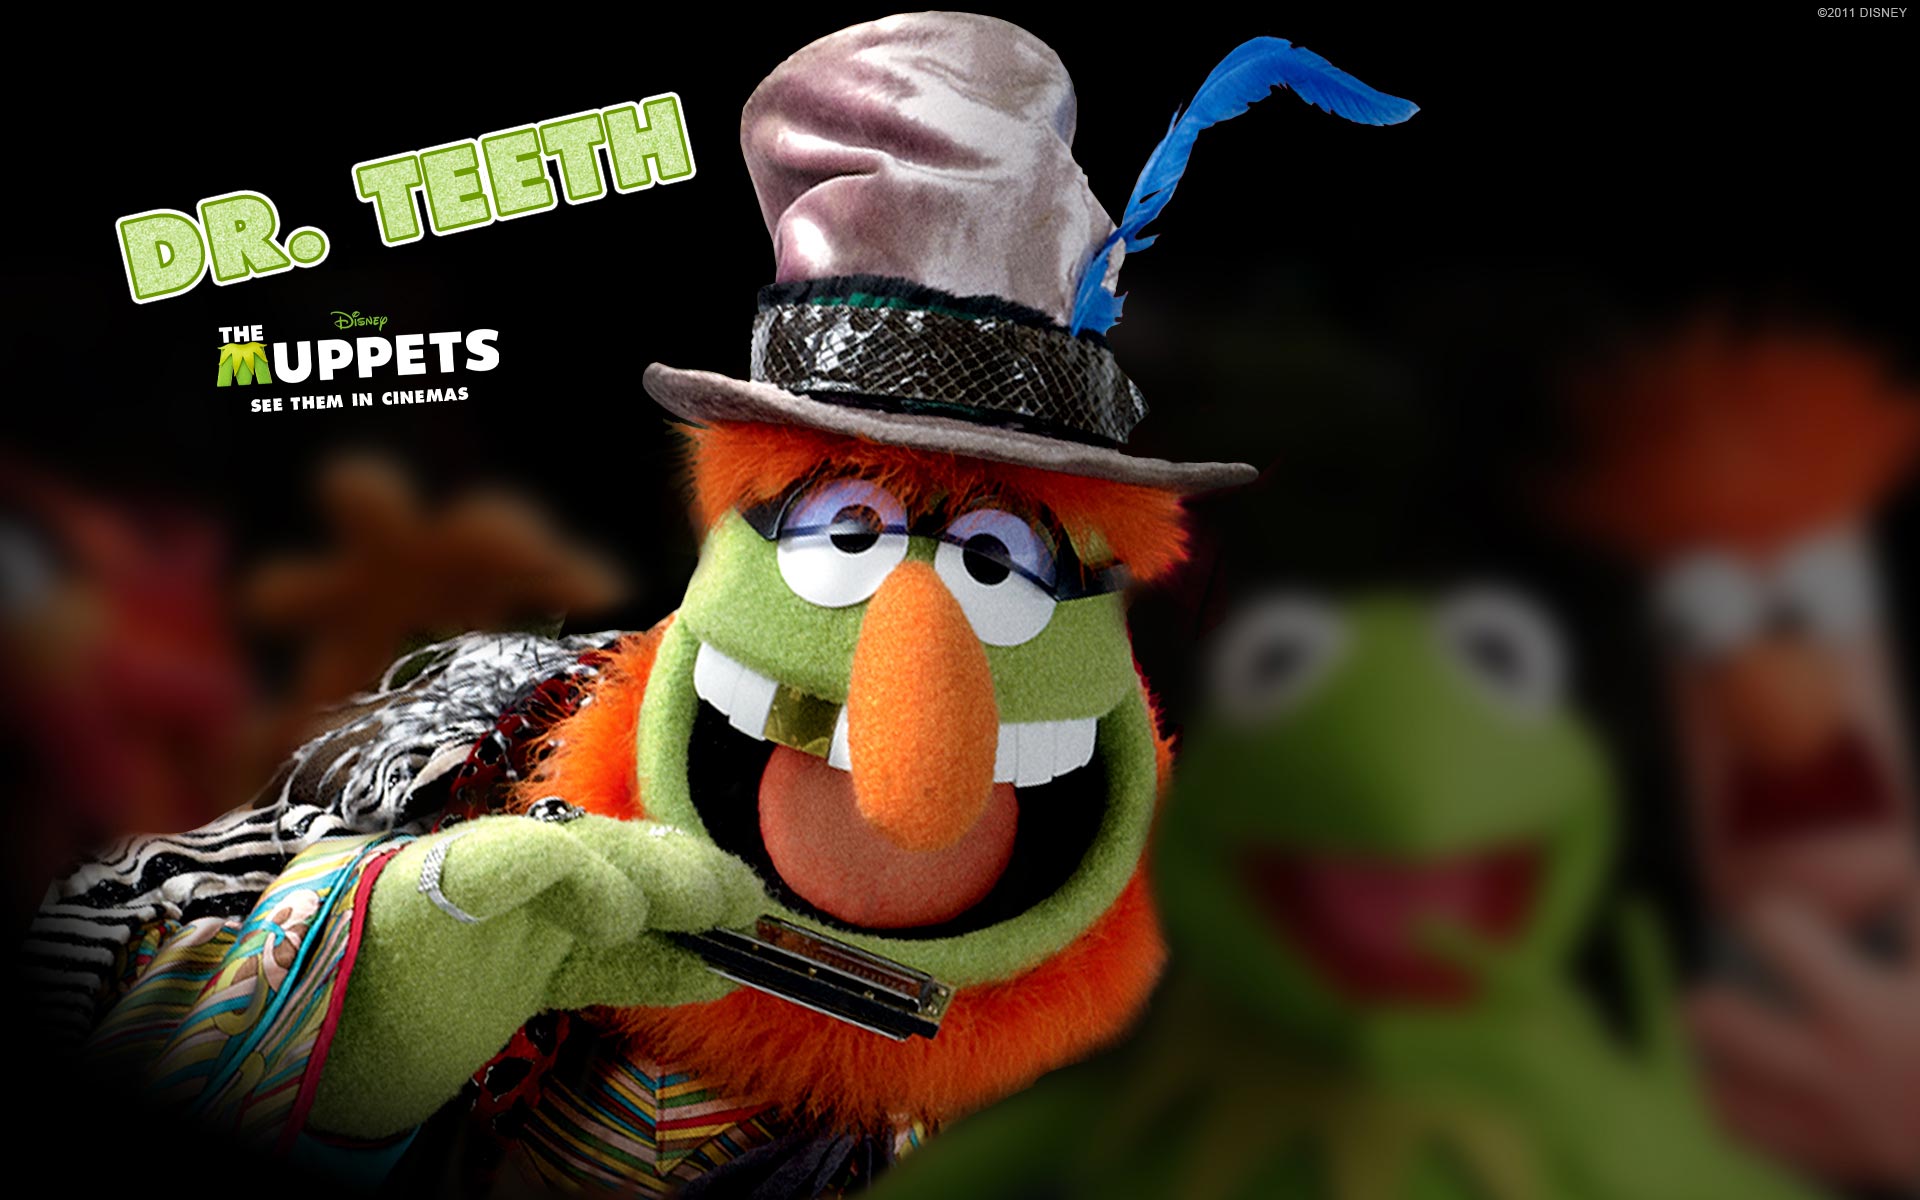 Dr. Teeth, The Muppets Wallpaper 1920x1200